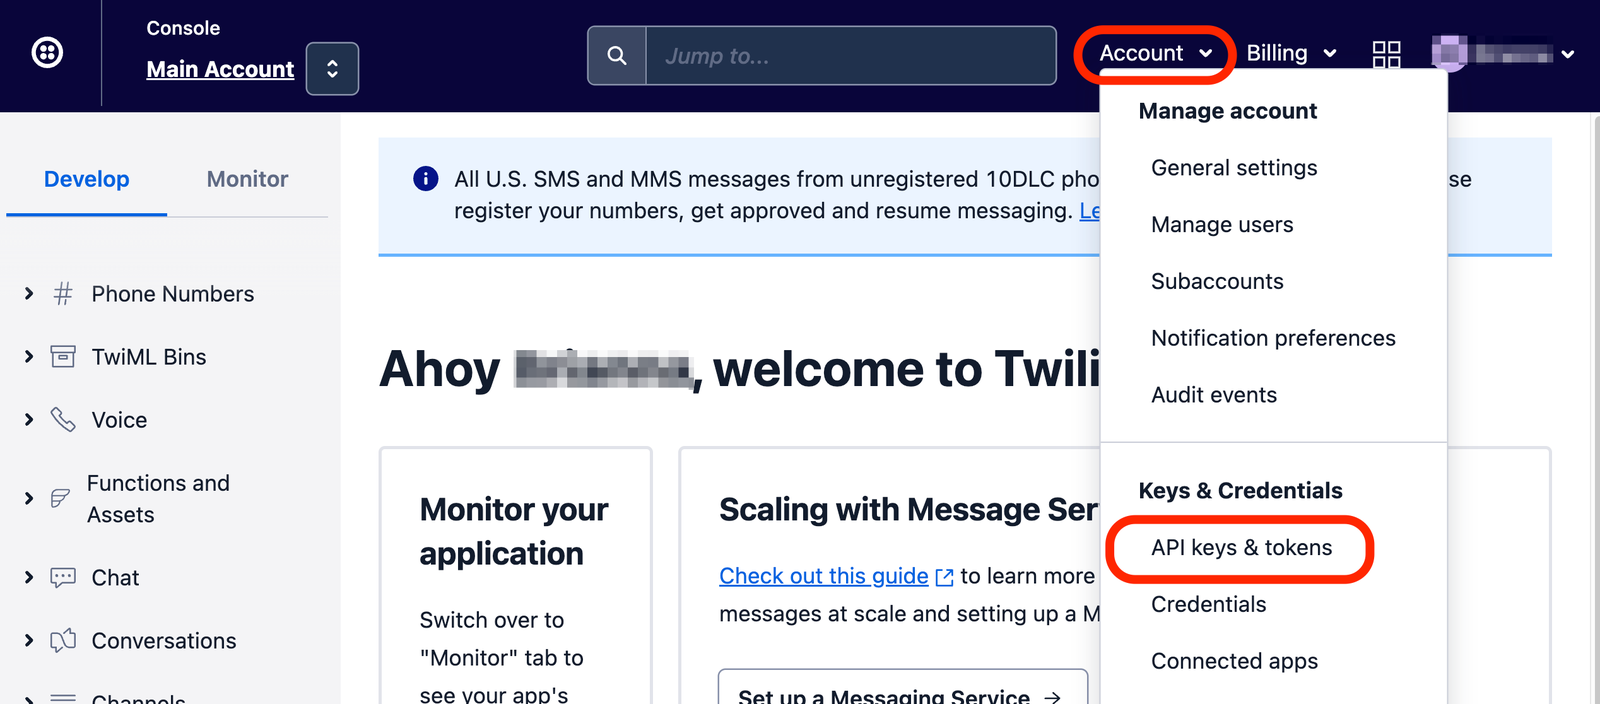 Screenshot of Twilio Console highlighting 'Accent' menu in top right corner and 'API Keys and tokens' link.